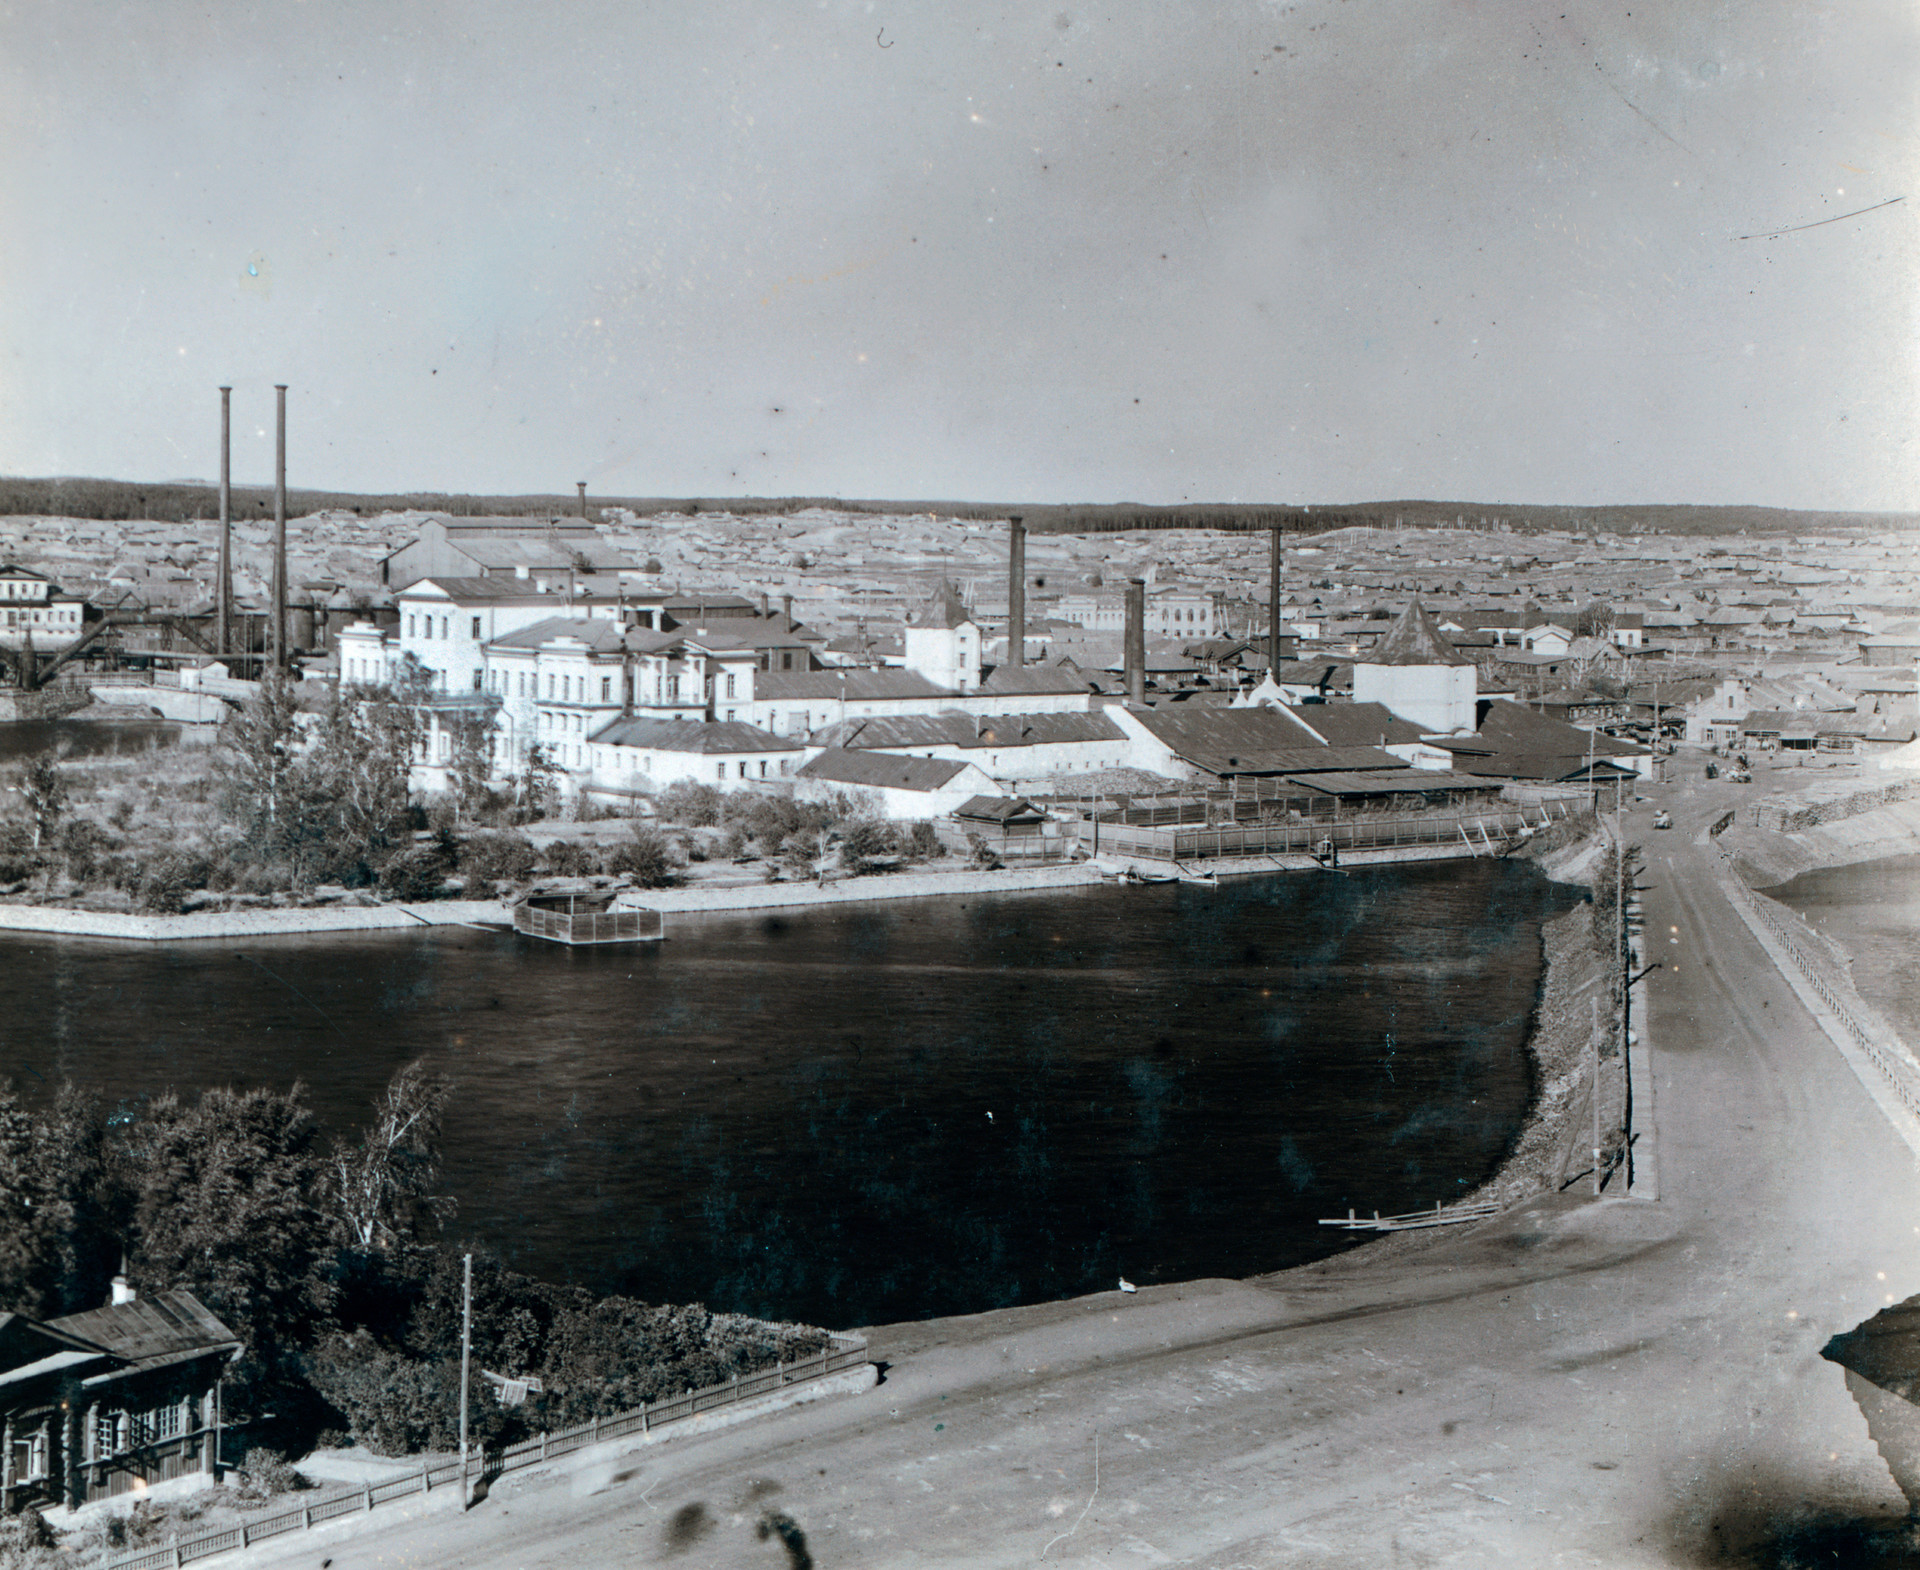 View of main Kyshtym factory with White House on former Demidov estate. Foreground: Town Pond (Kyshtym River). Right: 18th-century tower built by Nikita Demidov. 1909.